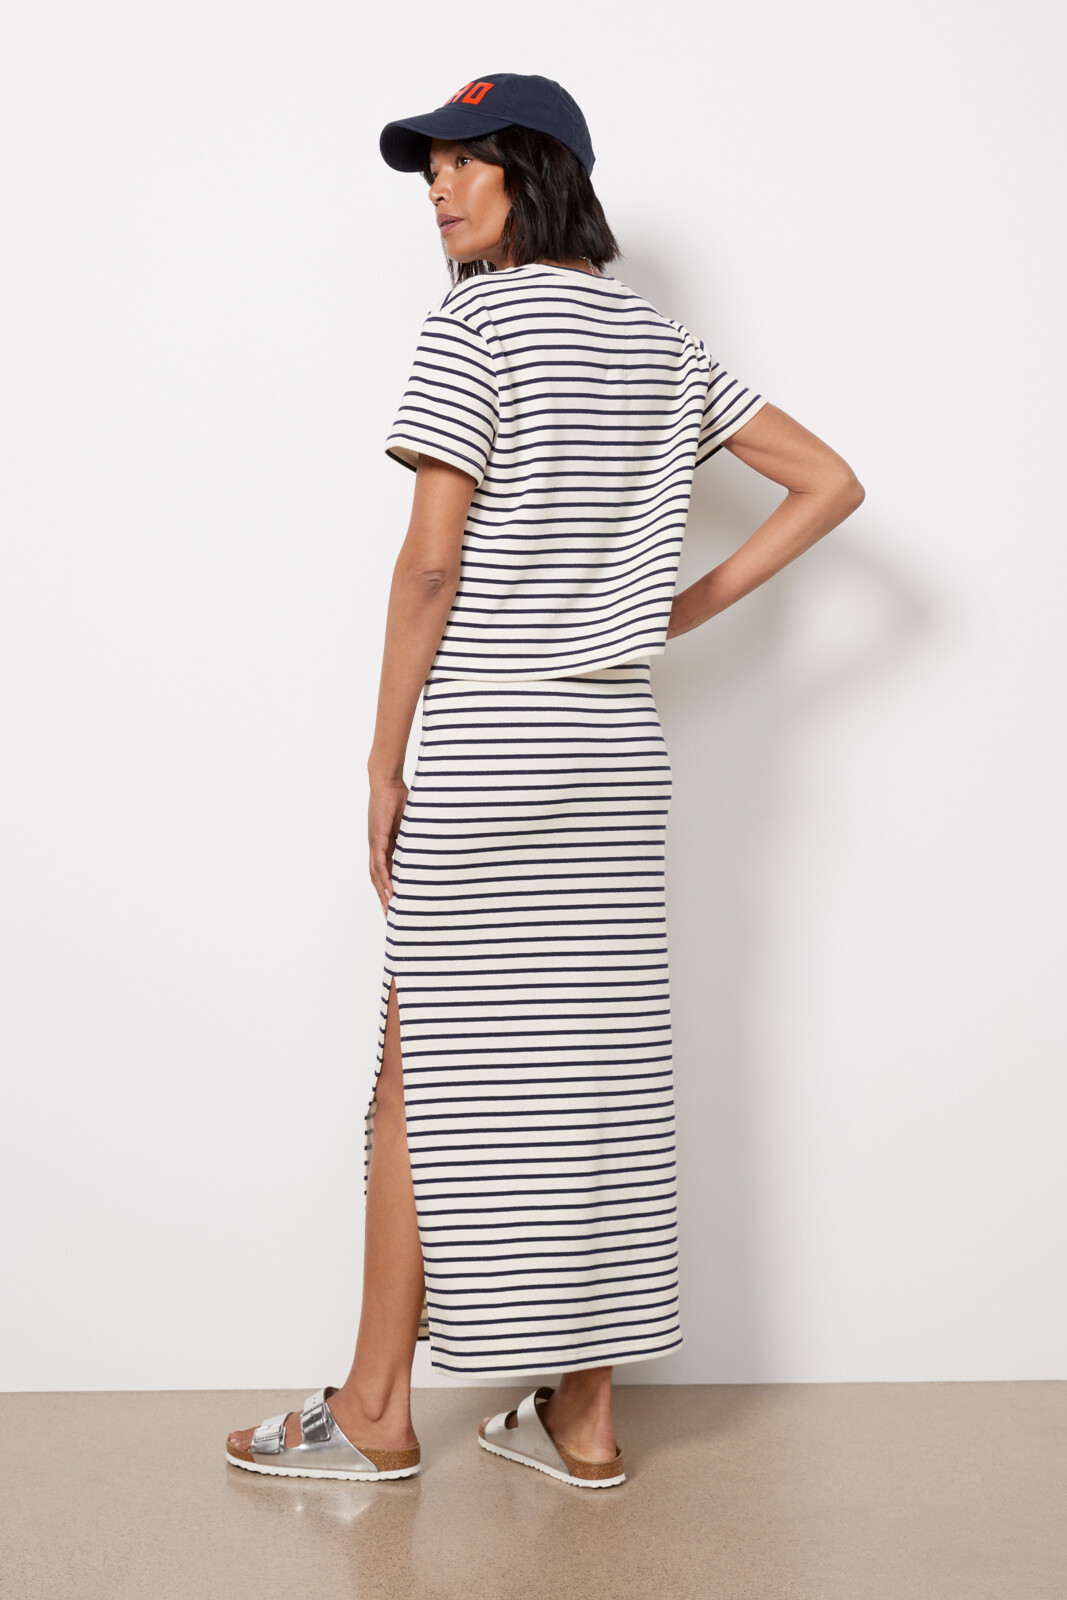 Travel Must Have - Striped Skirt | Wear this w/ matching tee or separate it